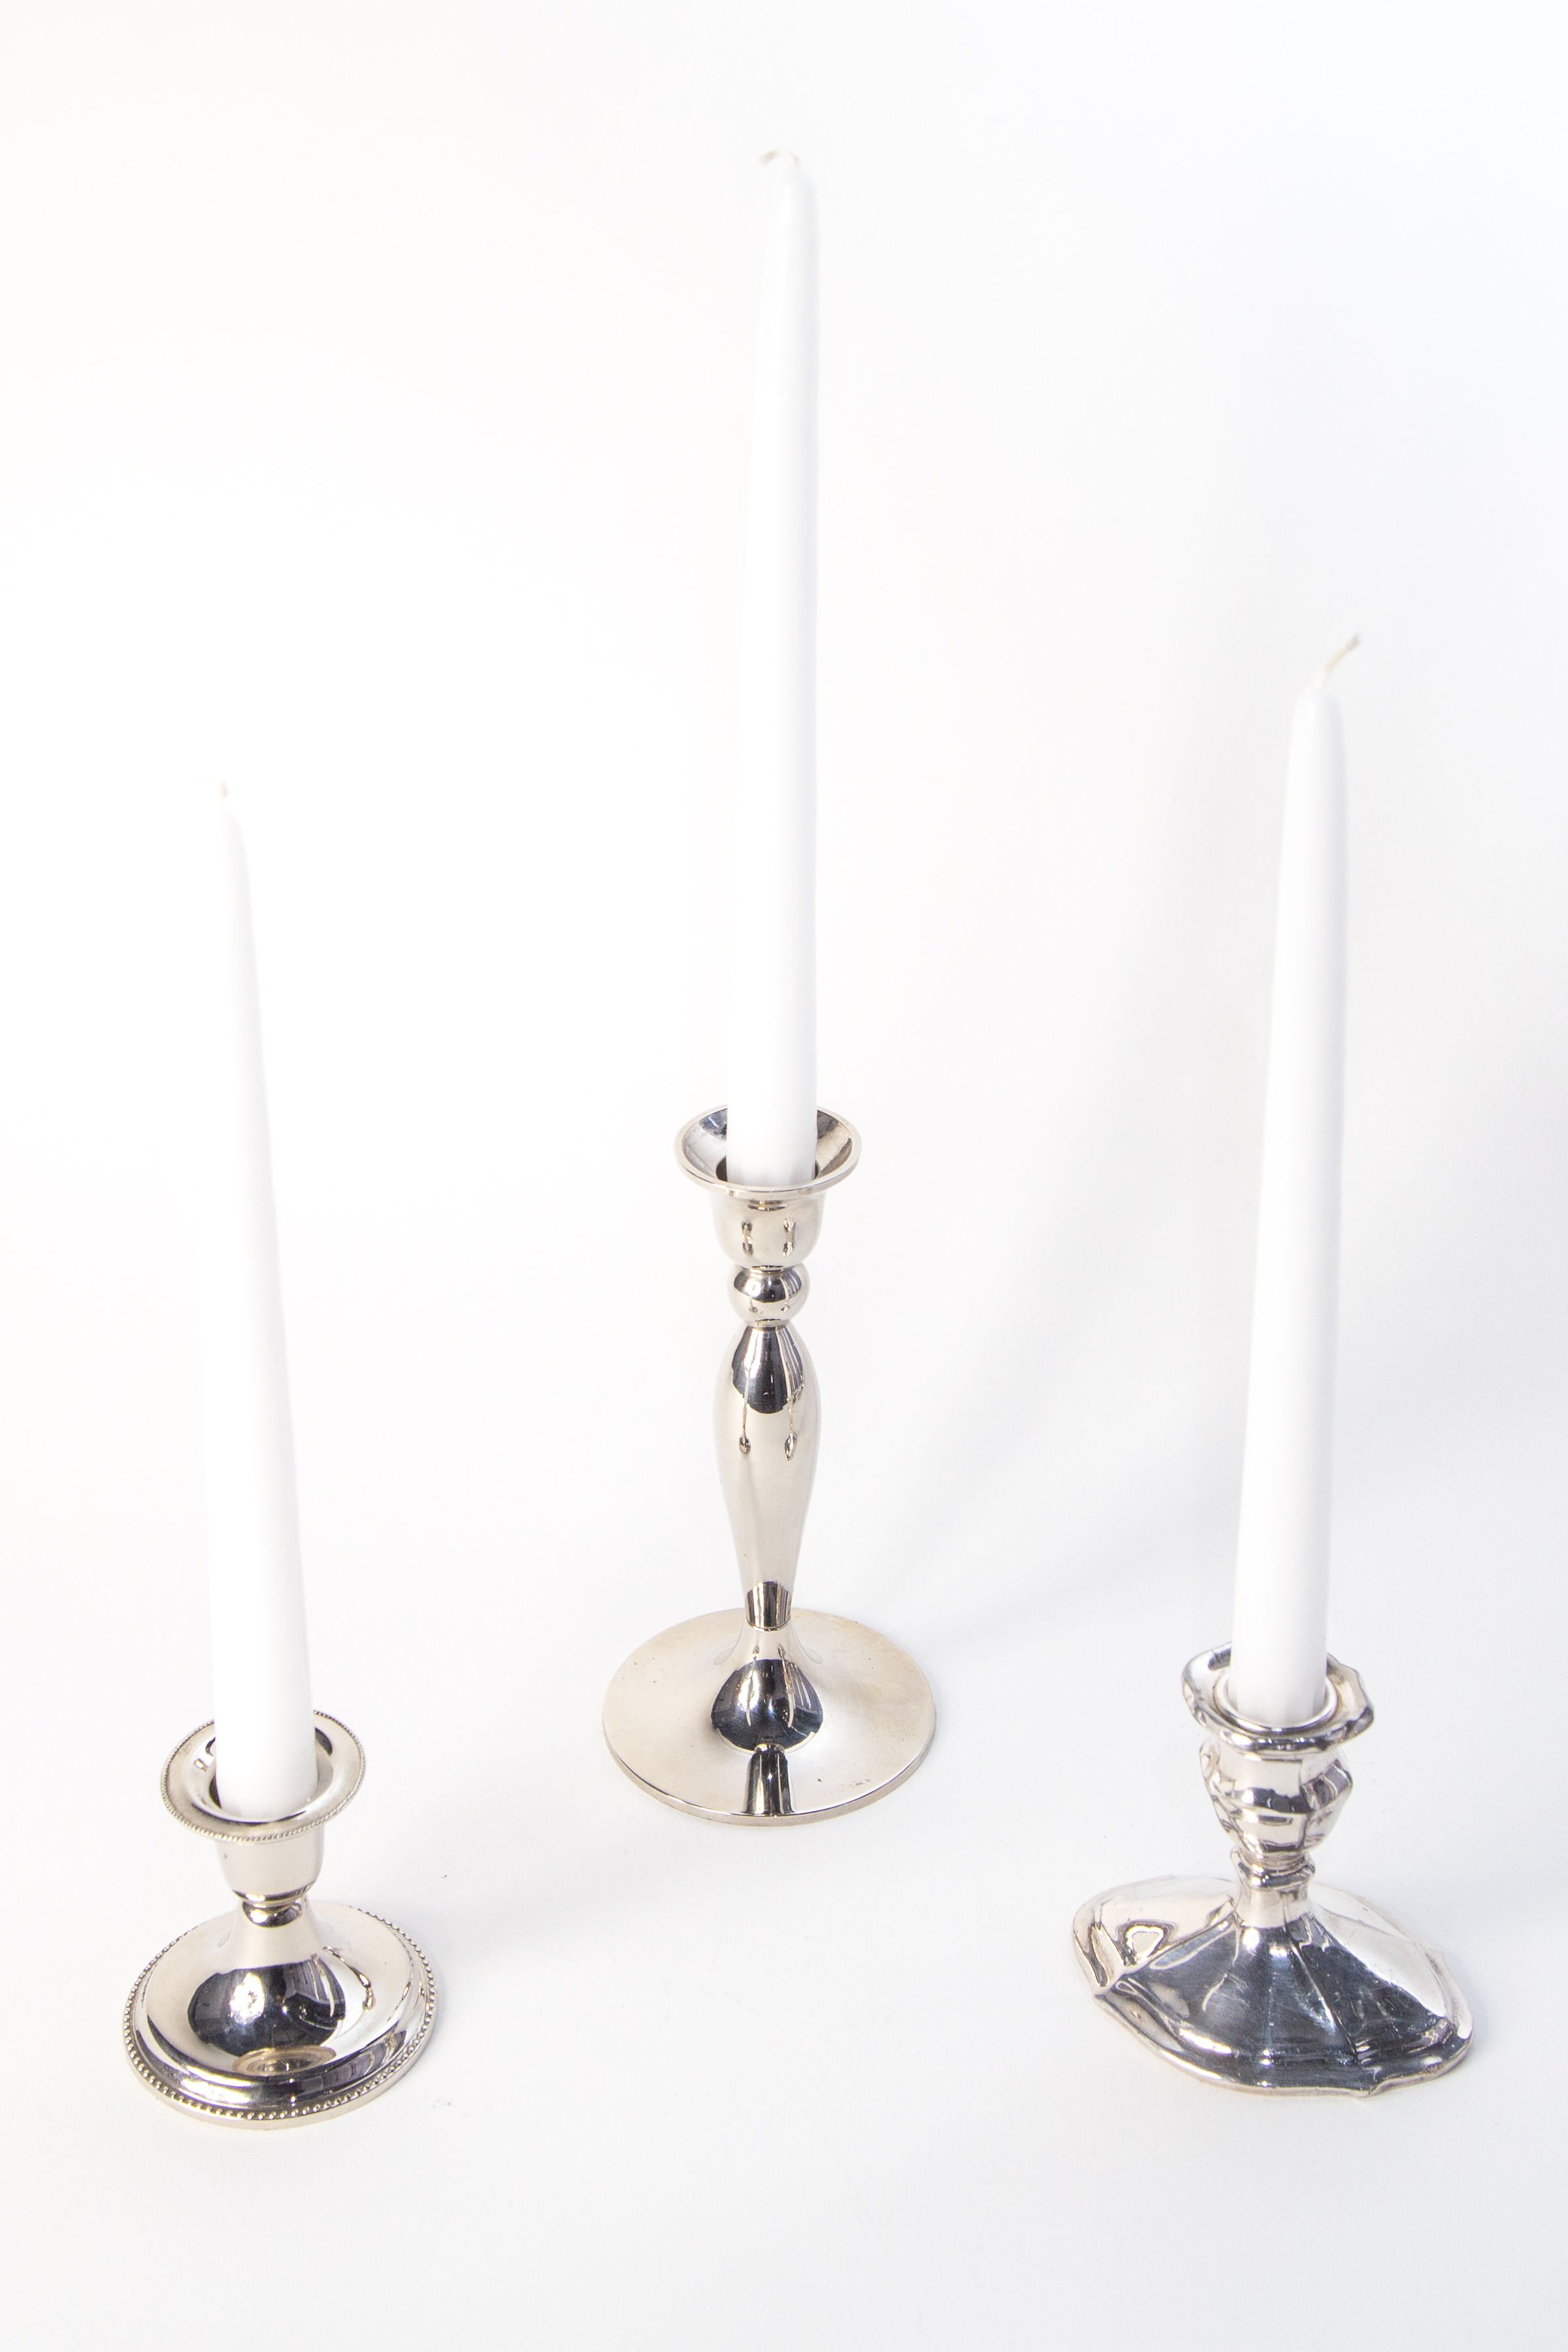 Silver Taper Candle Collection